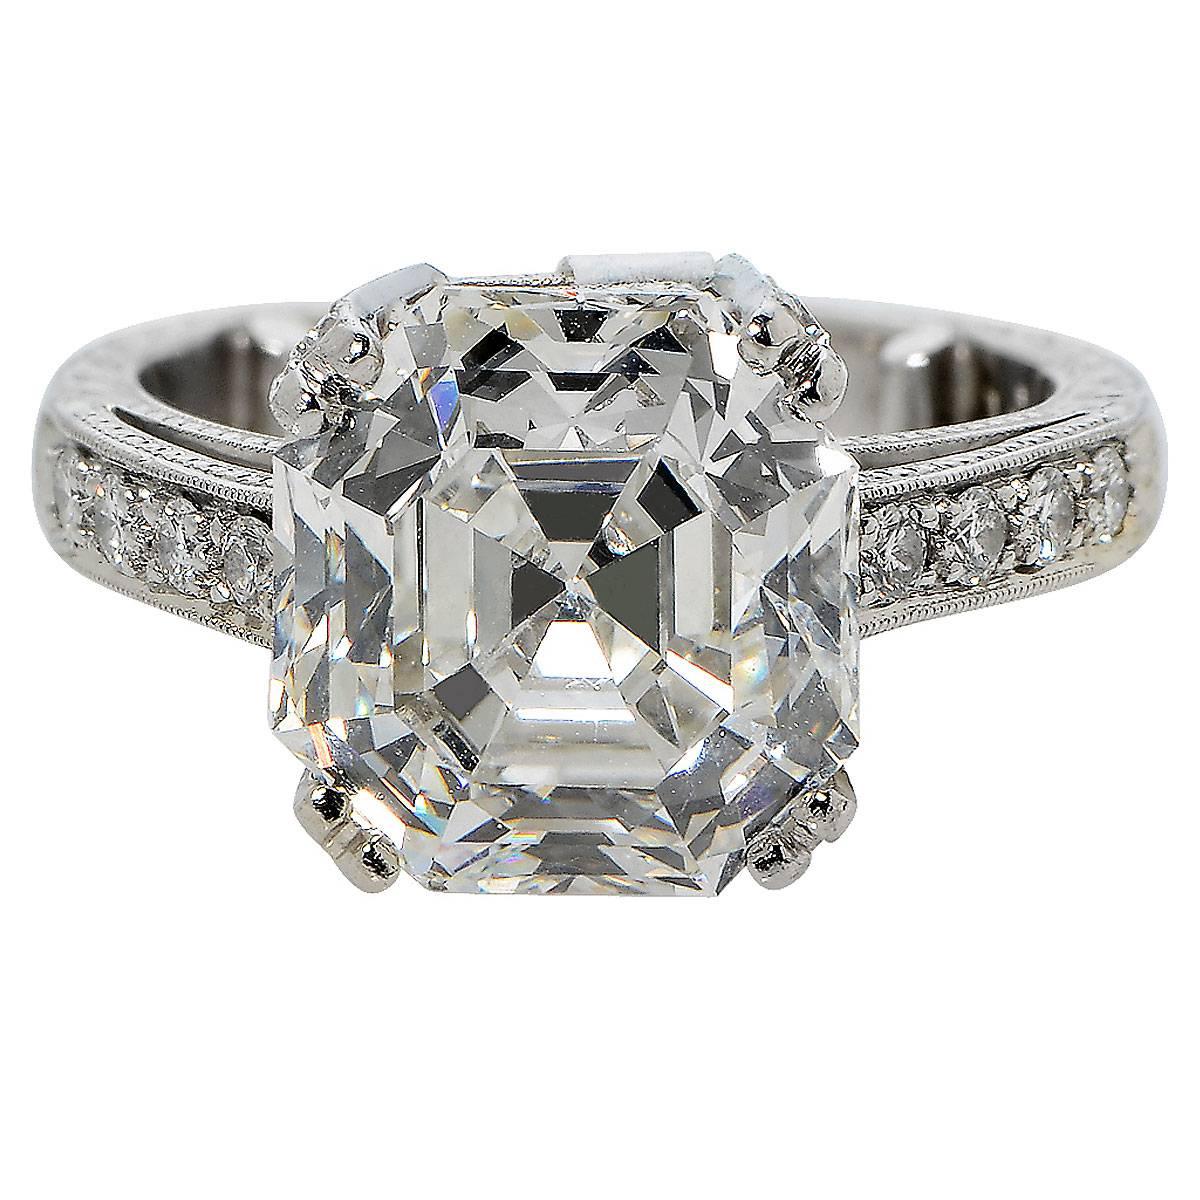 This stunning platinum ring features a 6.32ct square emerald / asscher cut diamond,  H color, VS1 clarity, and is accompanied by a GIA report. The center diamond is accented by .85ct of round brilliant cut diamonds, G color, VS clarity. Its total